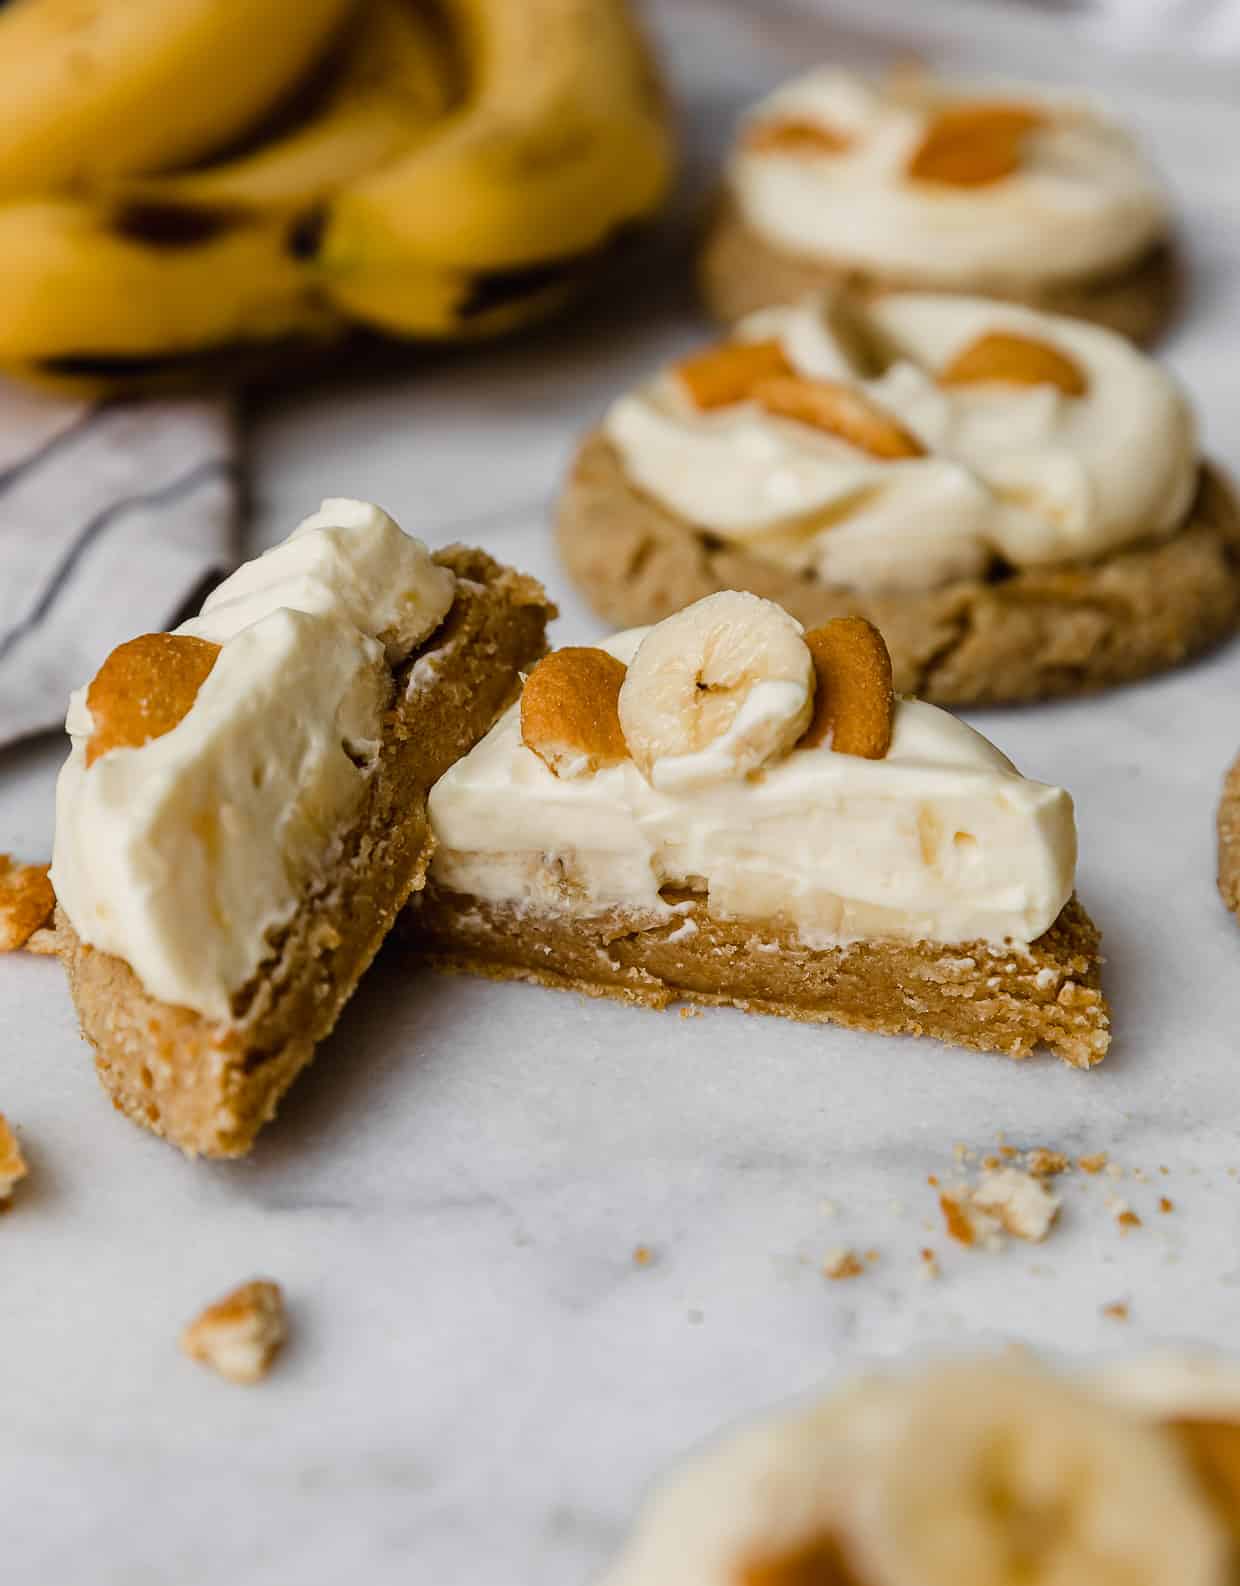 A Banana Cream Pie Cookie cut in half on a marble table.